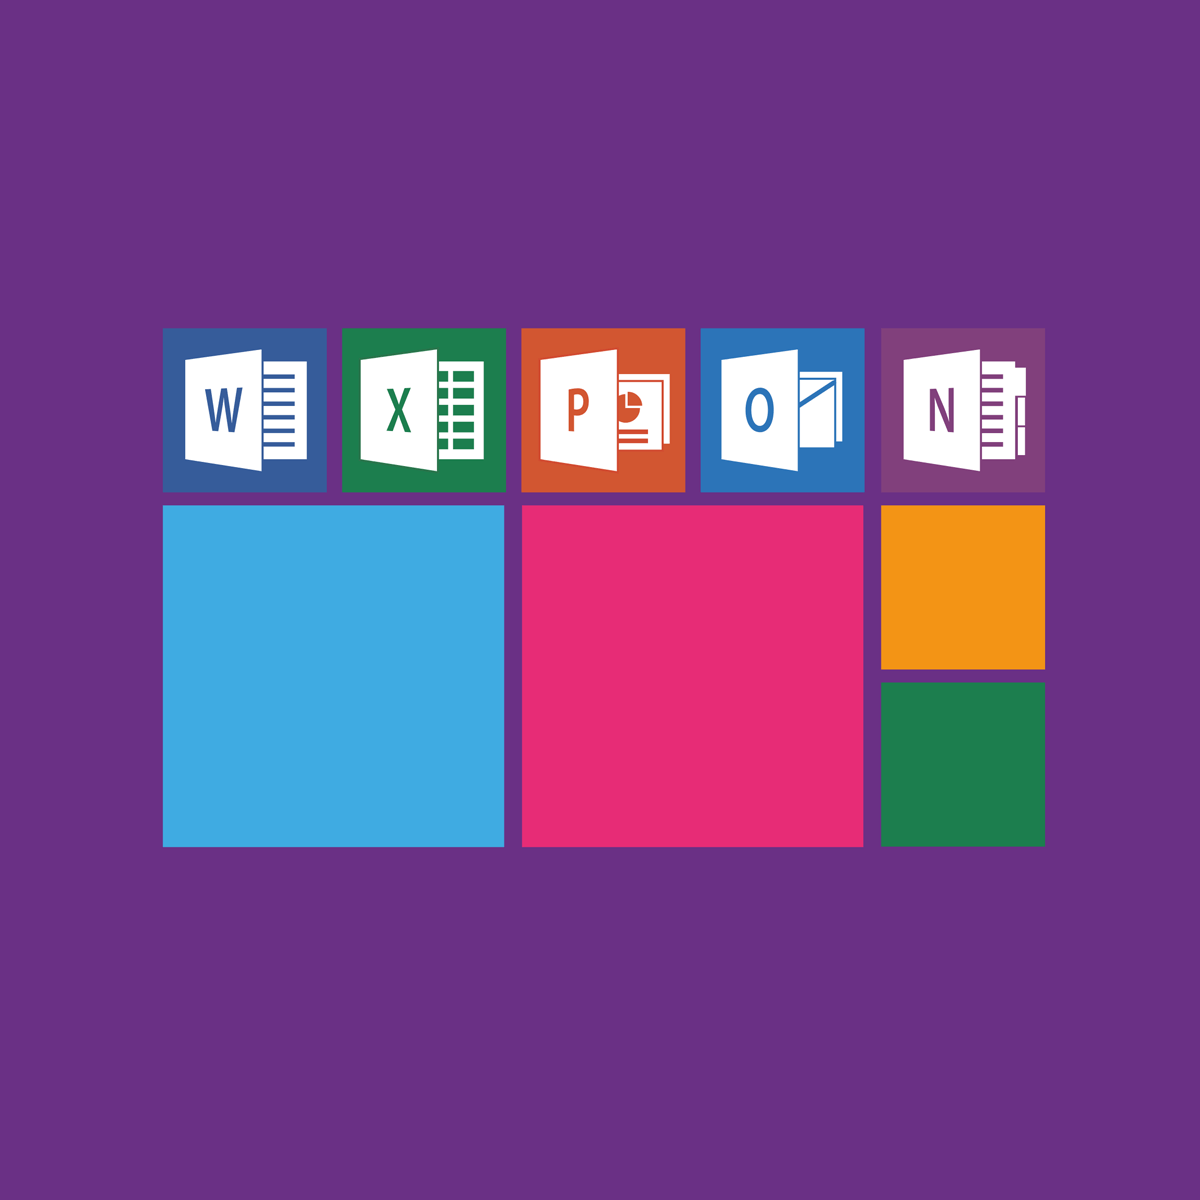 Microsoft Office gets new filetype icons